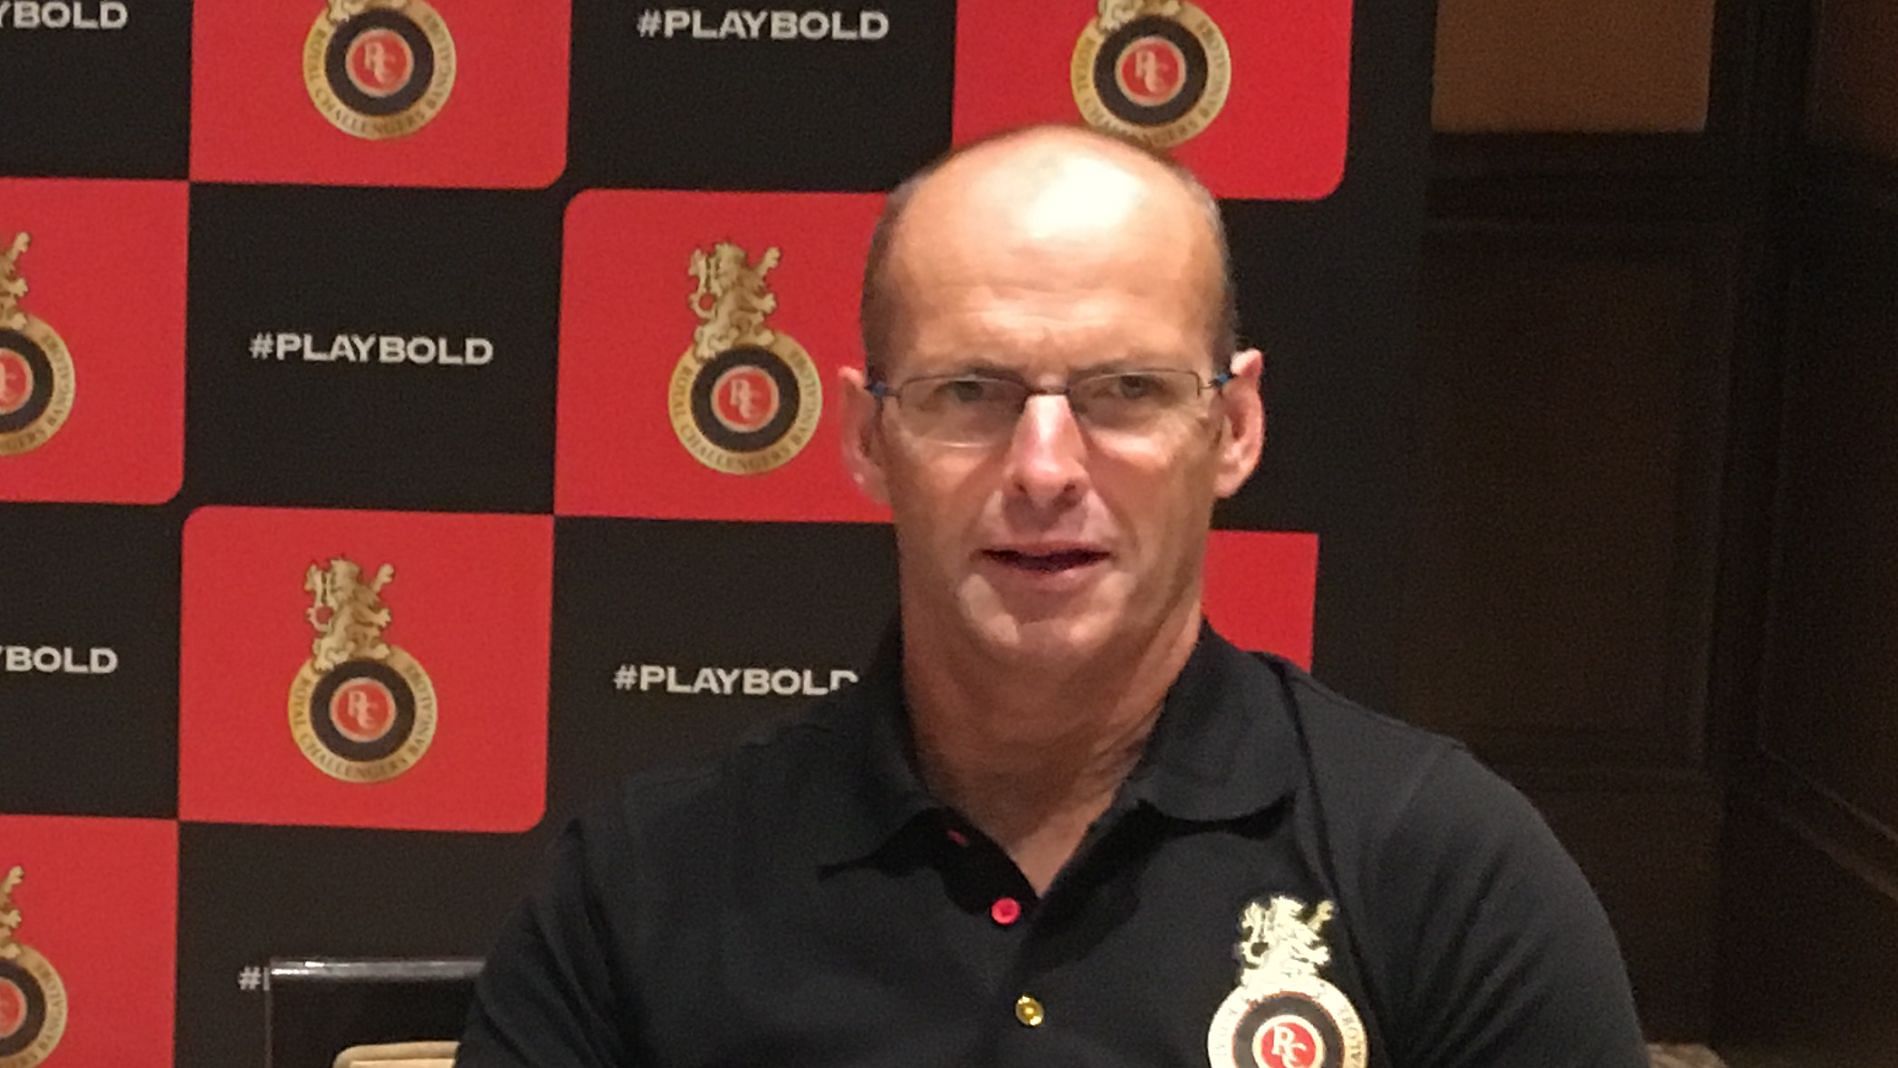 Gary Kirsten speaks to The Quint ahead of IPL 2019.